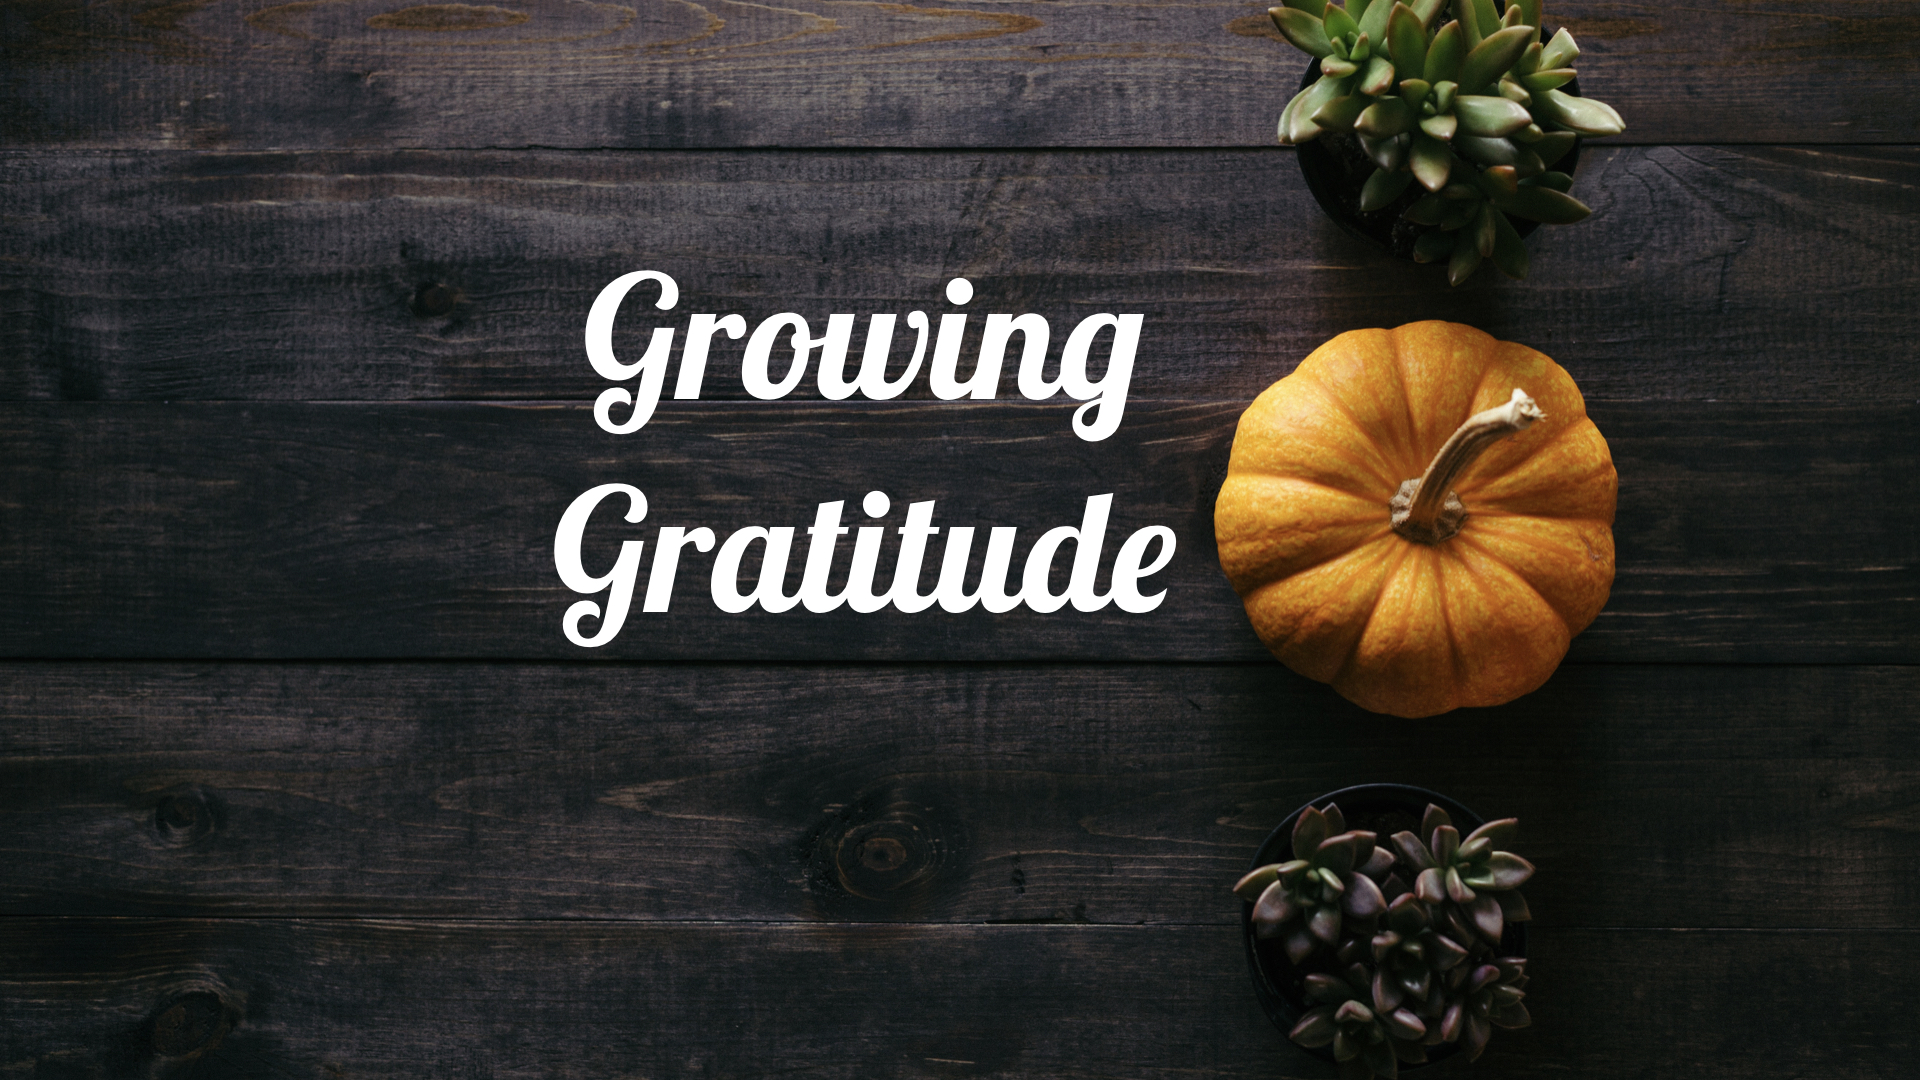 Growing Gratitude | living gratefully with my abilities